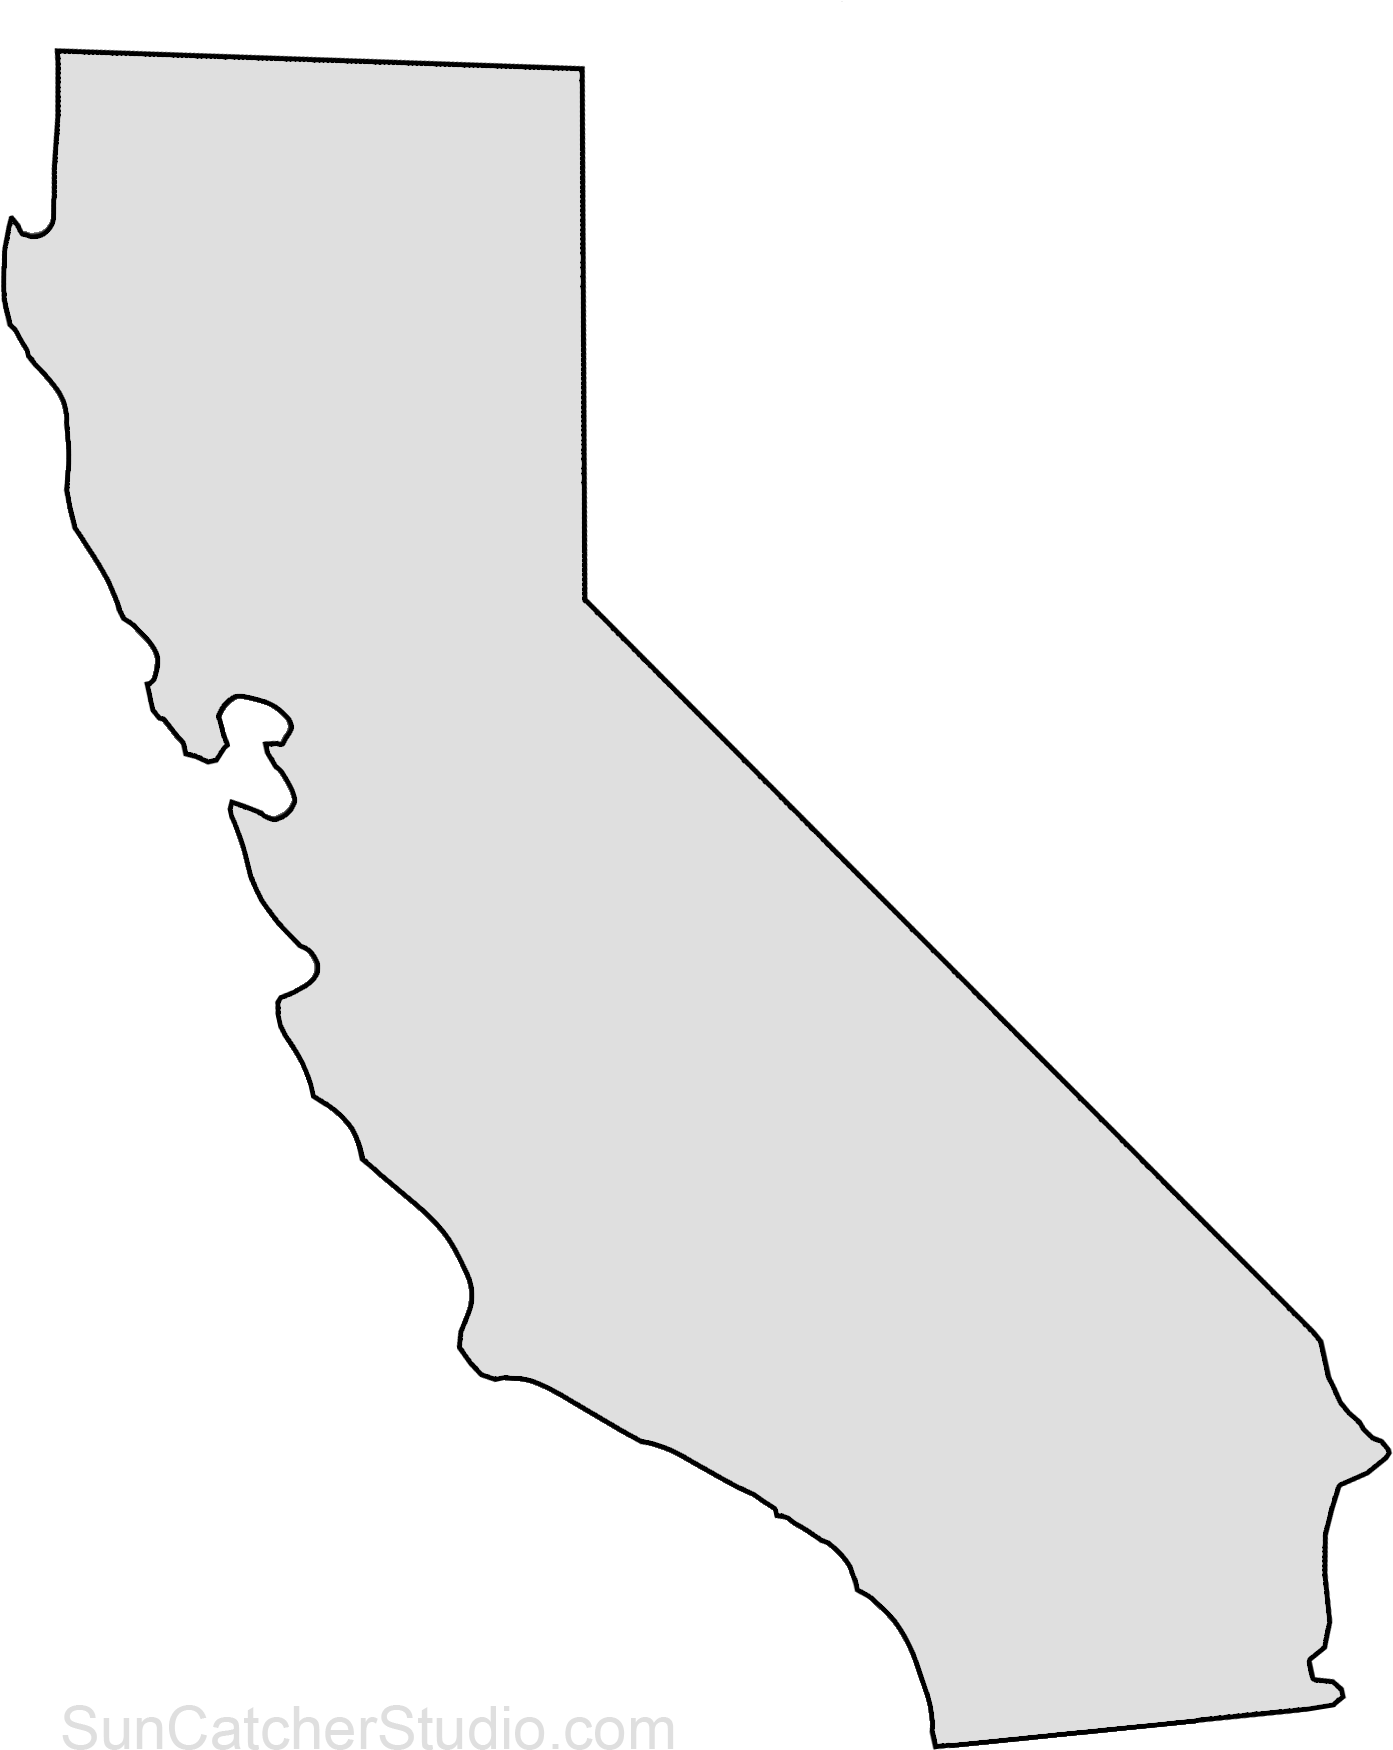 A White Outline Of A State